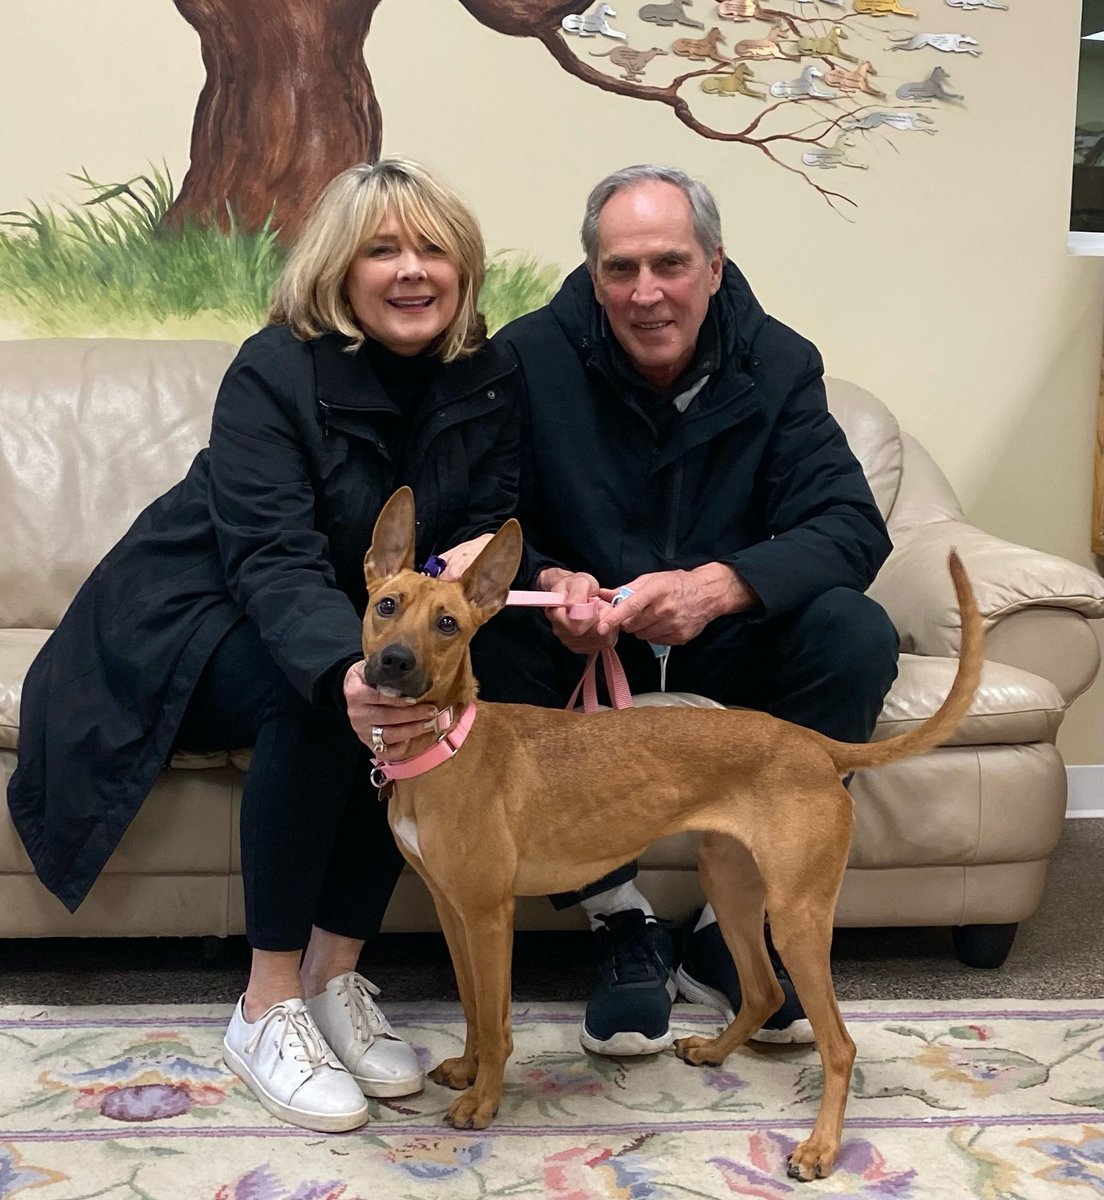 It was a lot of fun yesterday for our volunteers watching Donna Lynn, our last dog from Hawaii, prance and smooze up to her new parents and get adopted.  Here's Donna Lynn (nka Jenny) with her new parents, Shari & Alex.  Congrats and sweet life little Jenny! https://t.co/jsnZ3kfbwO